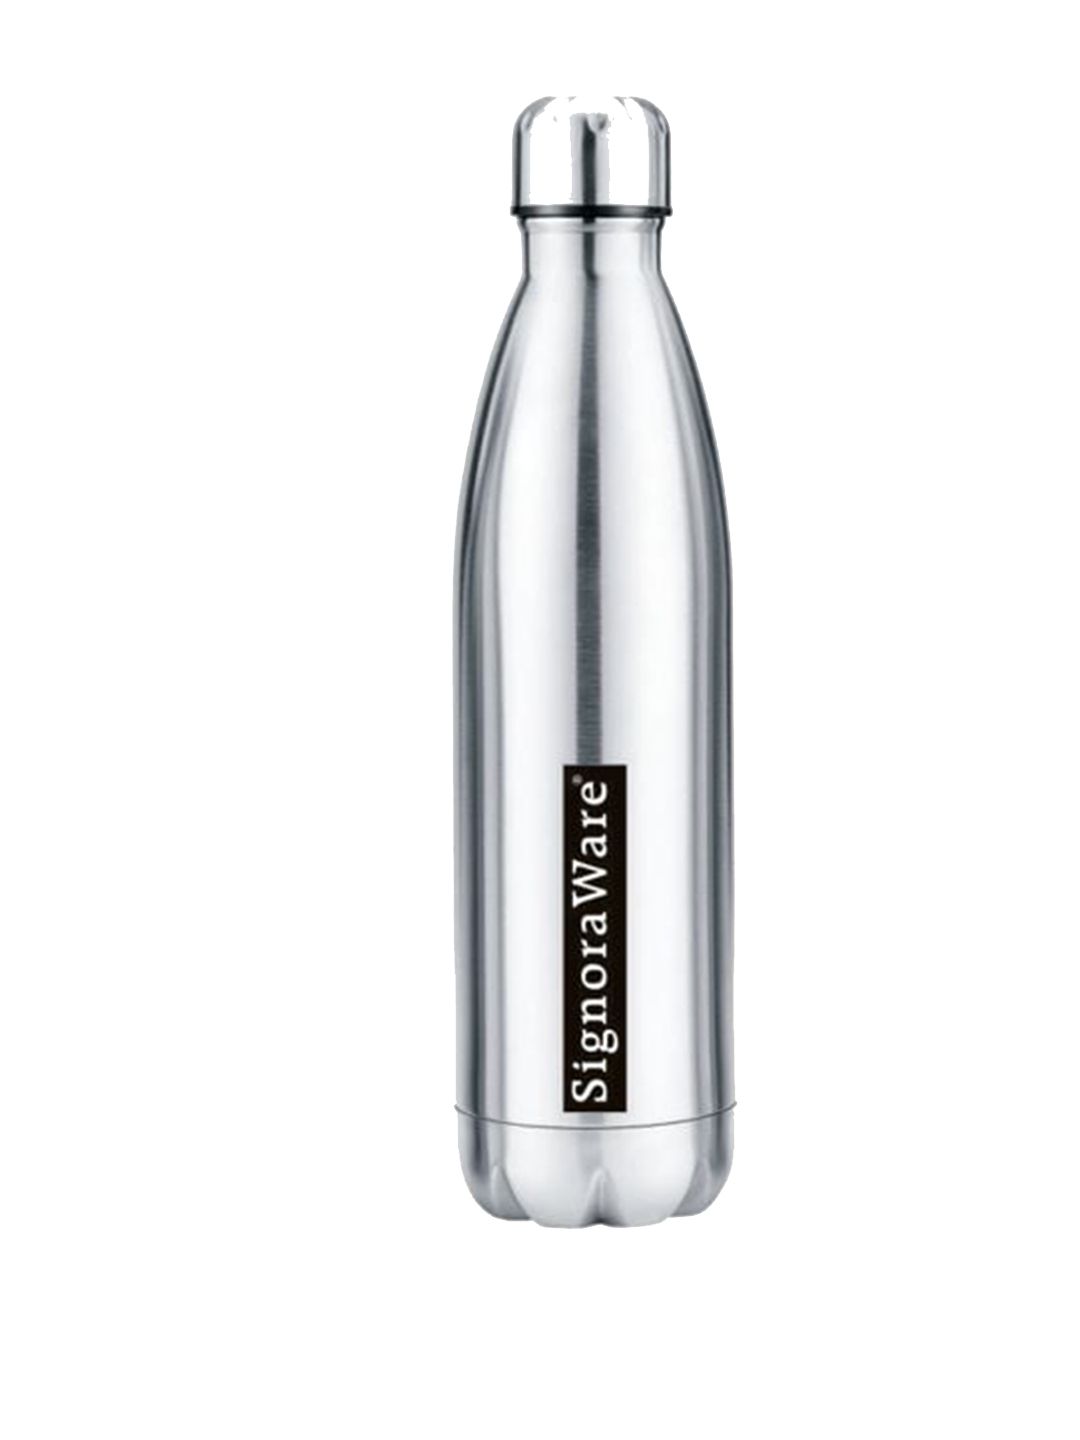 SignoraWare Silver-Toned Solid Water Bottle 700 ML Price in India